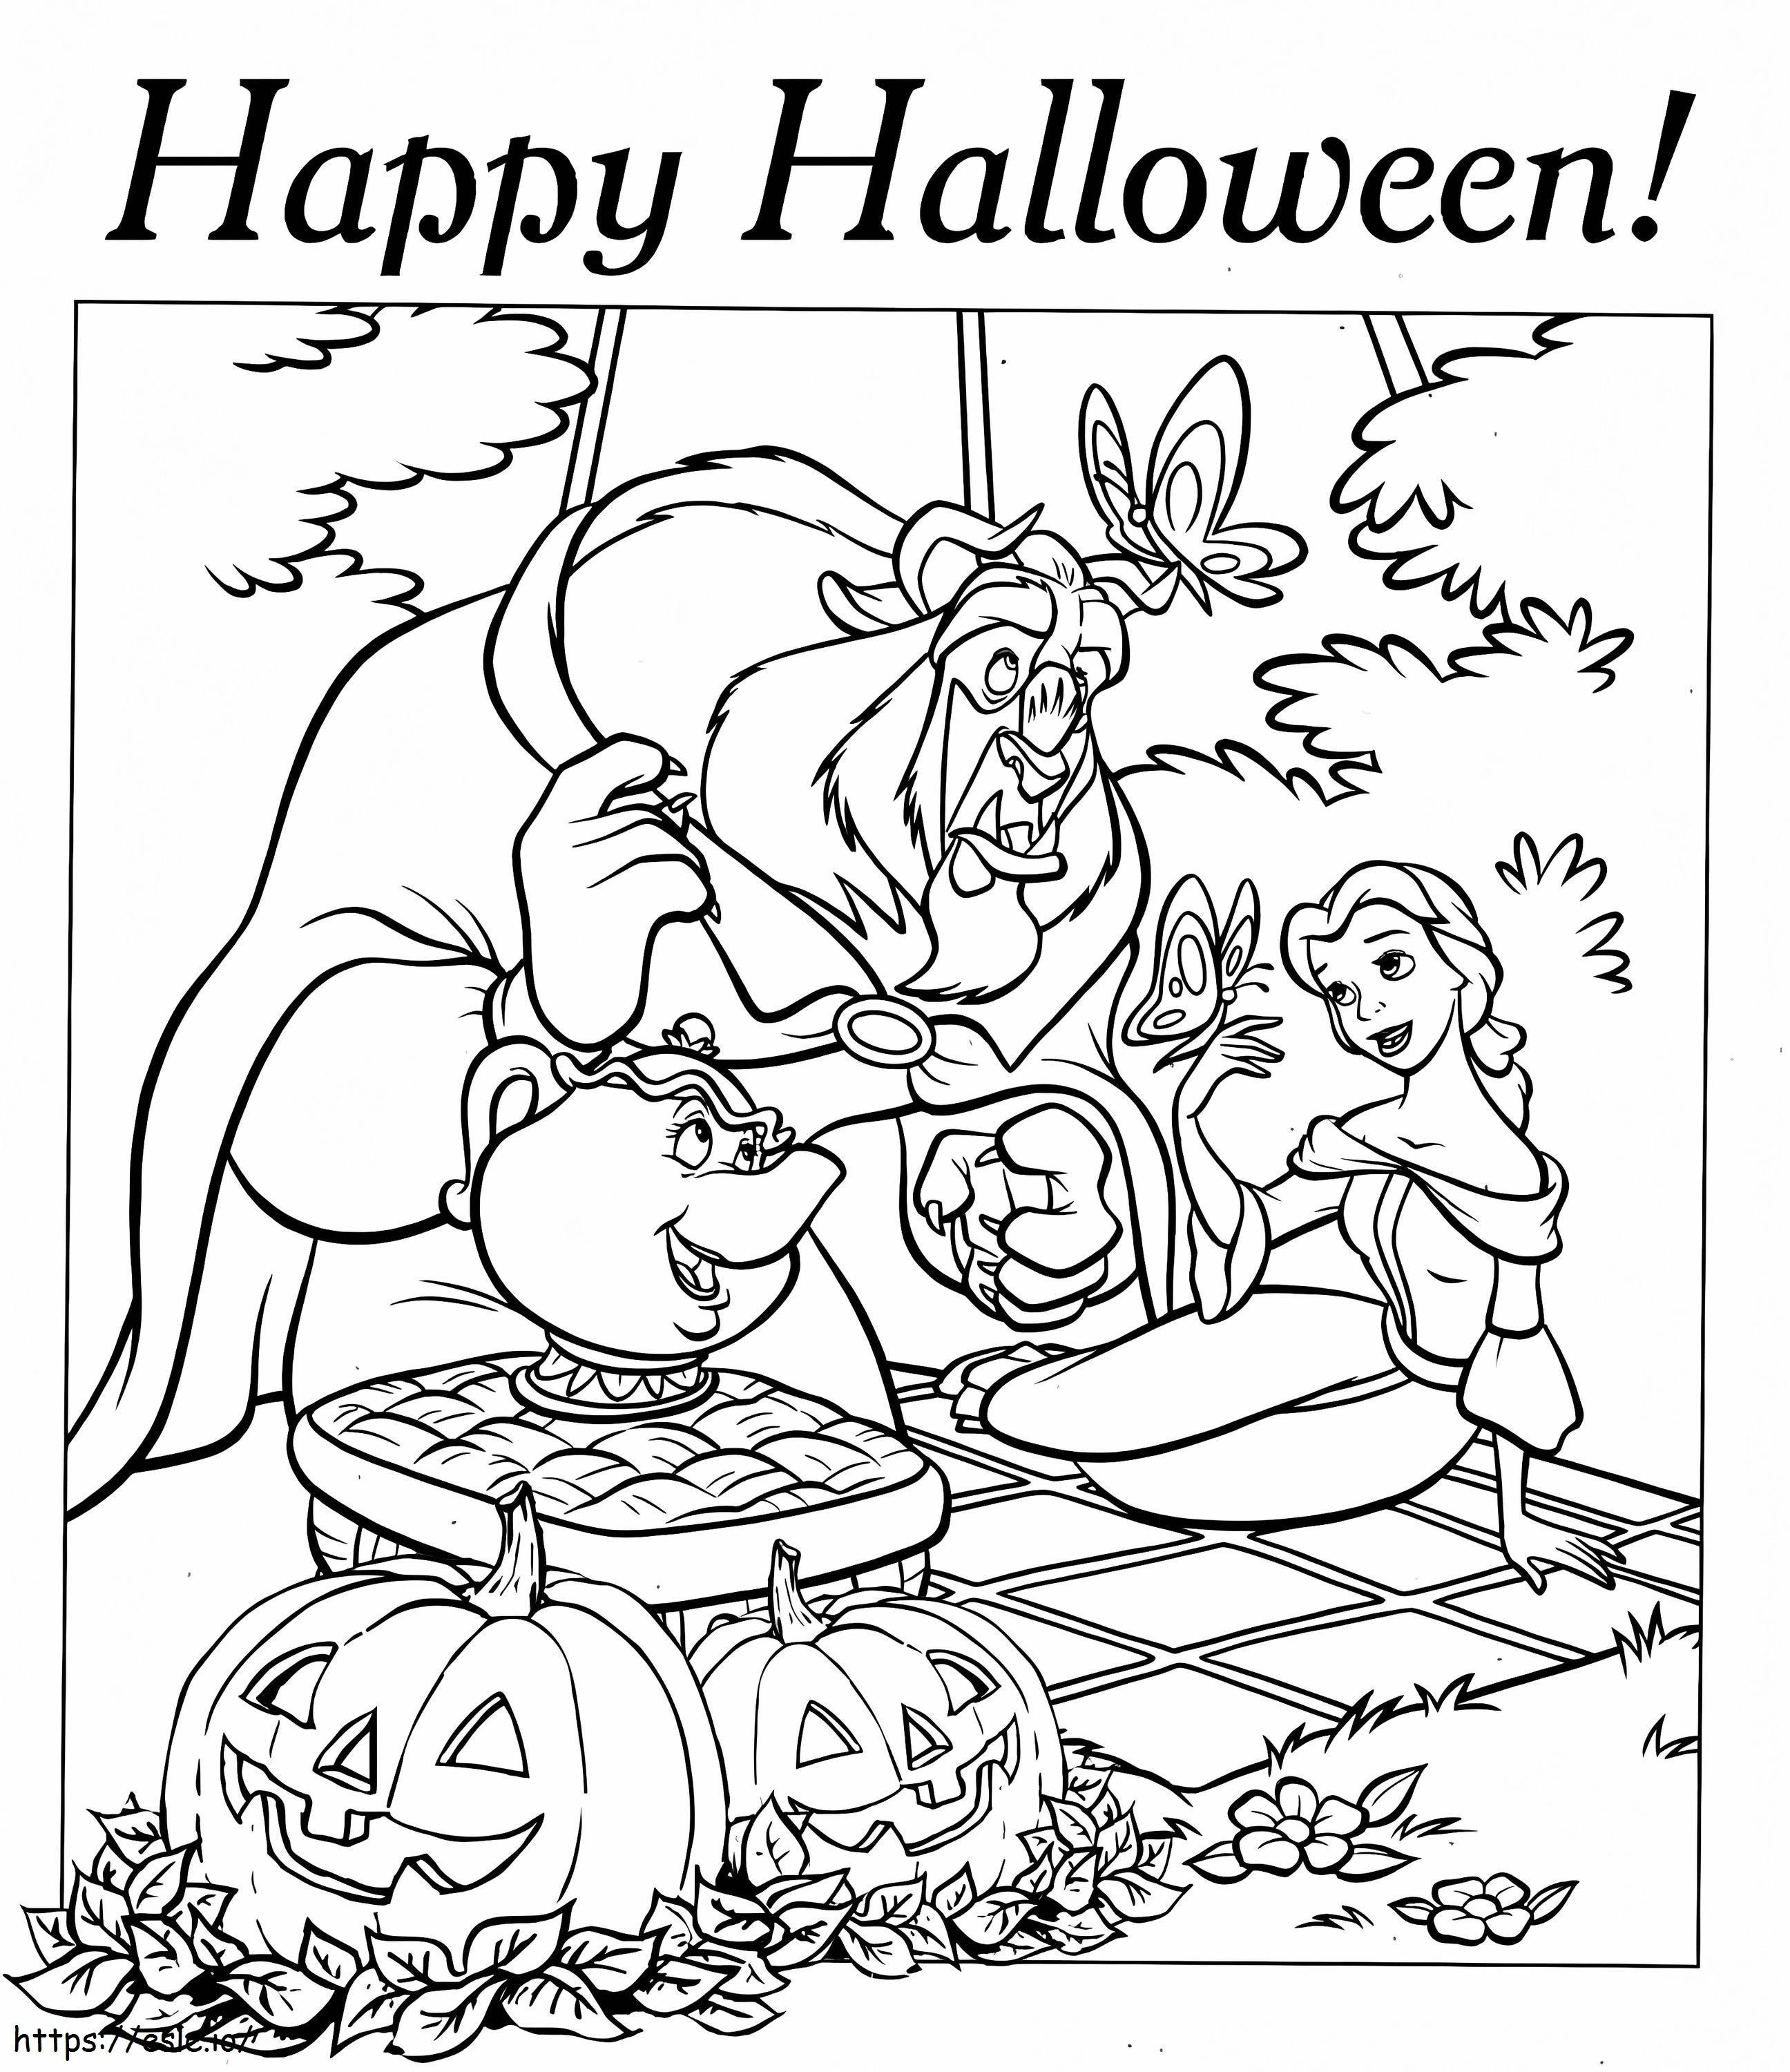 Halloween Beauty And The Beast coloring page